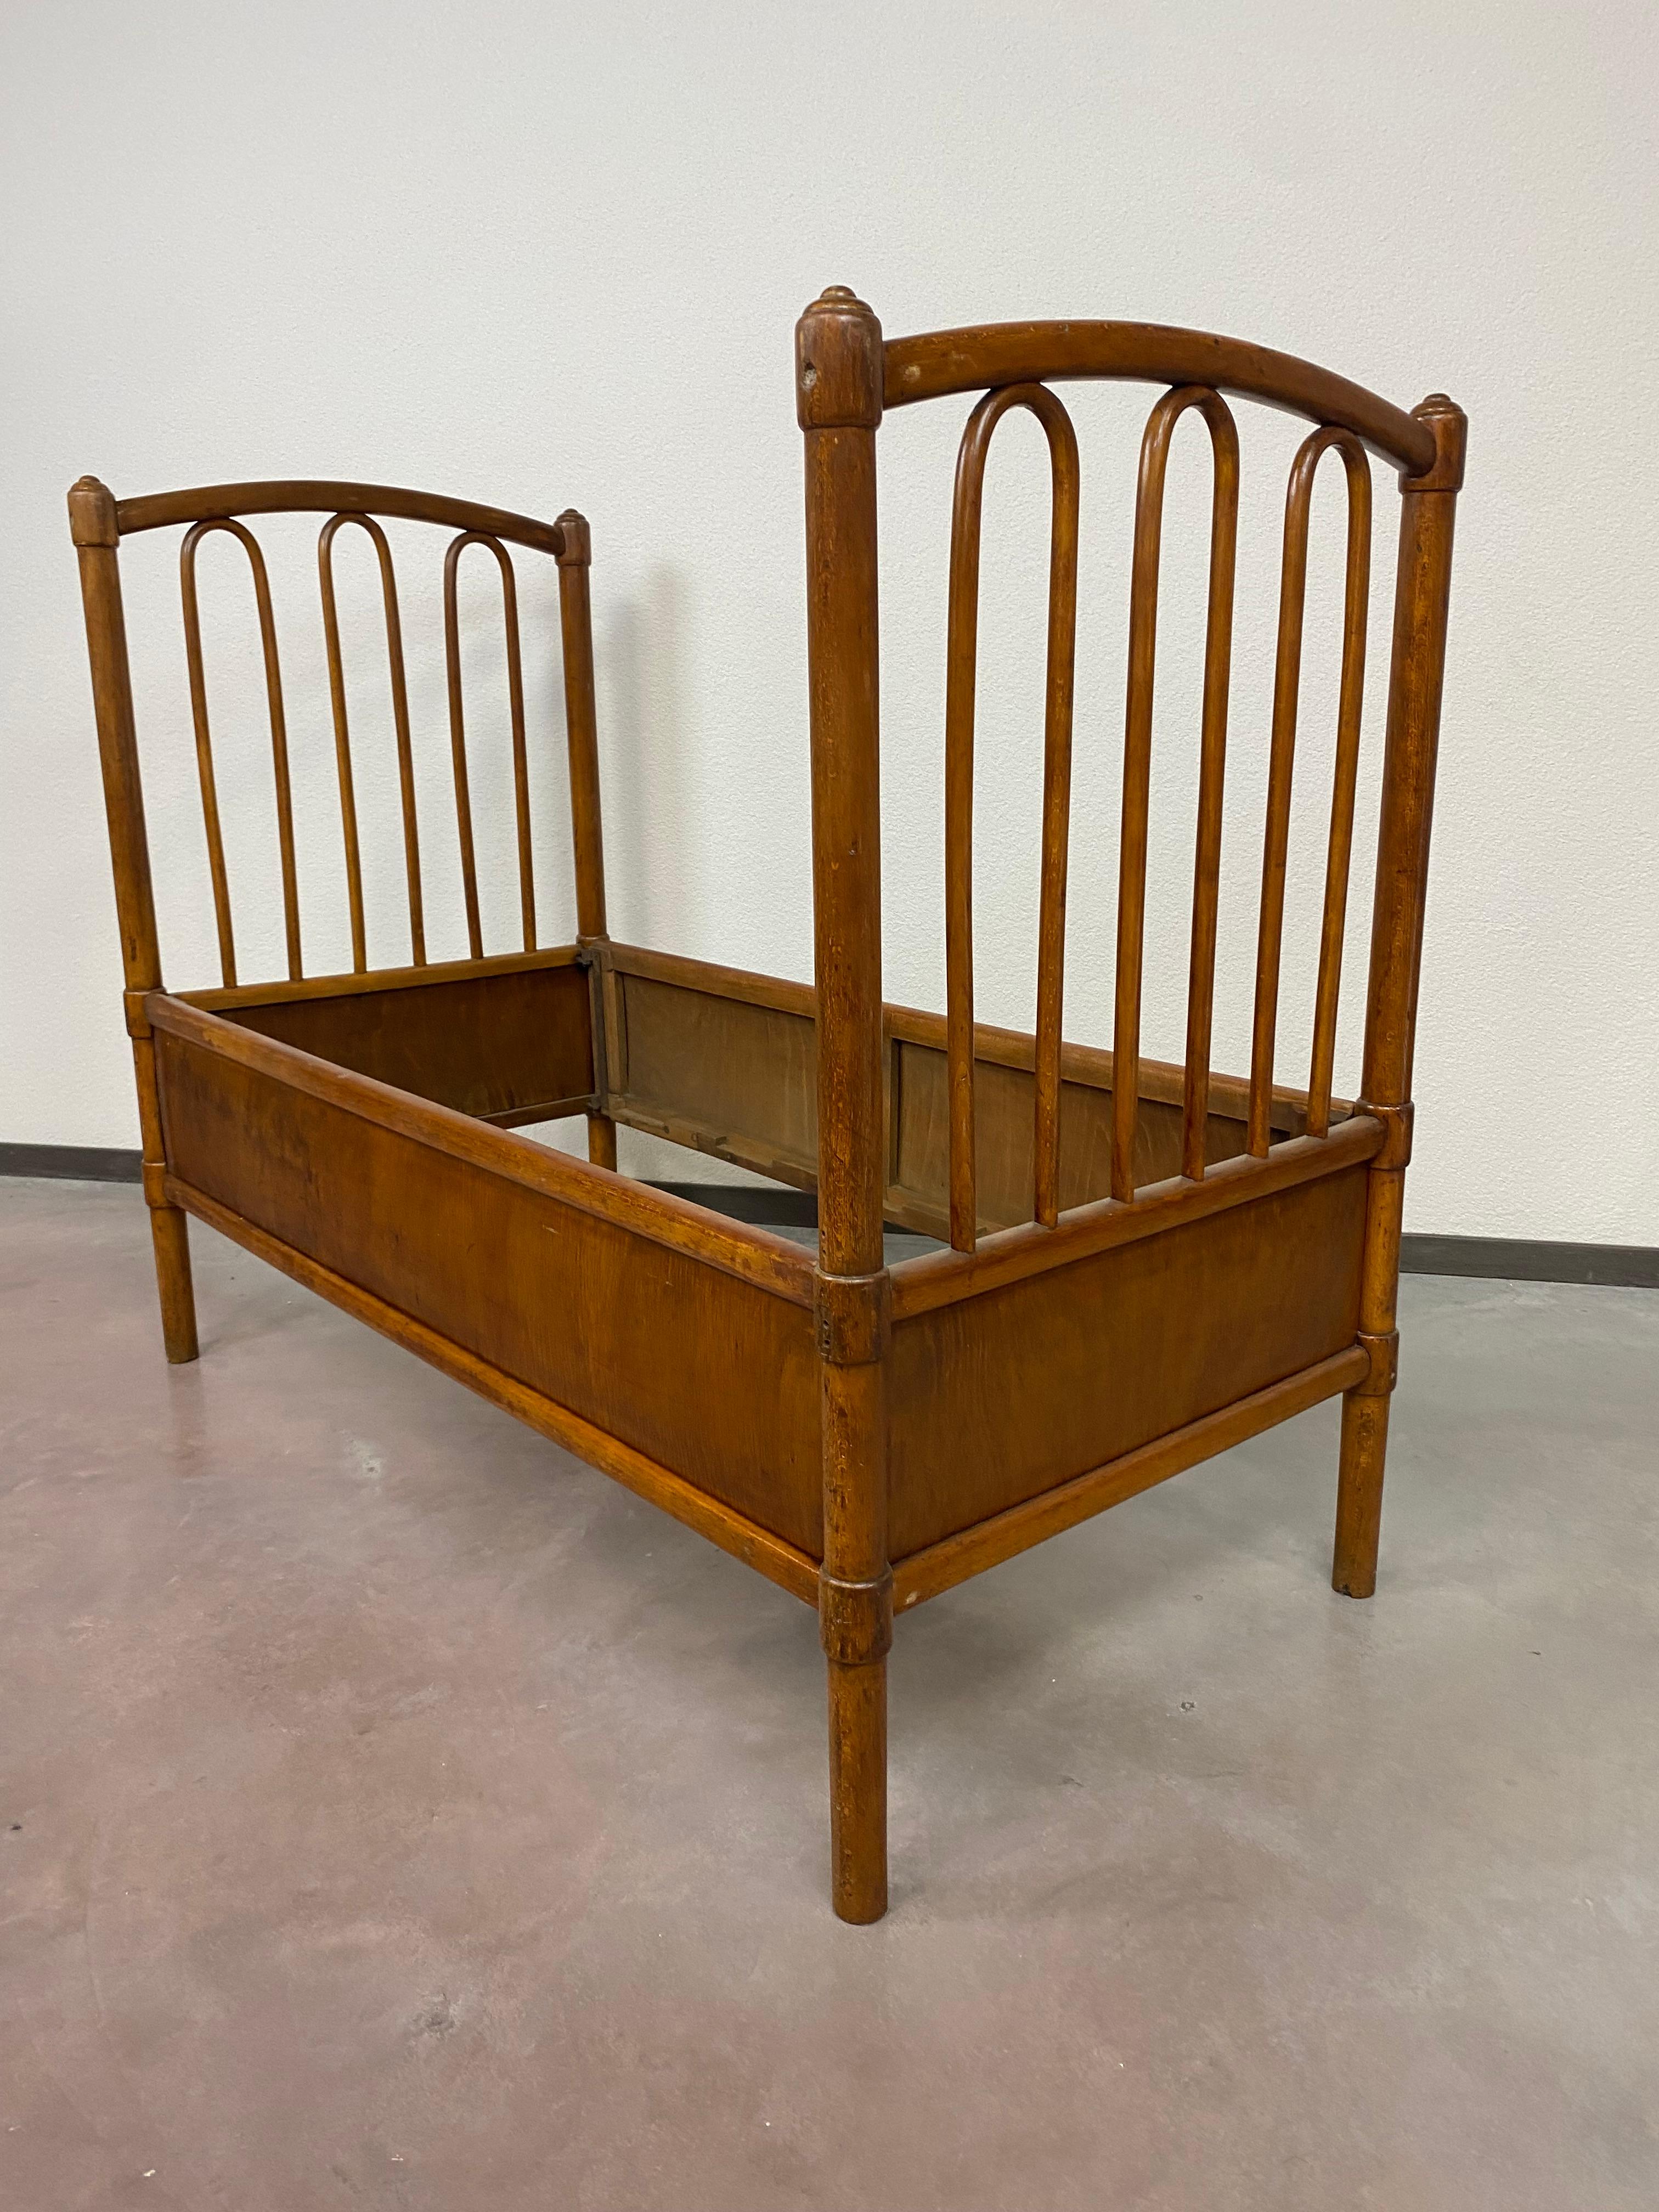 Thonet bed no.5 for a child. Wear consistent with age and use.